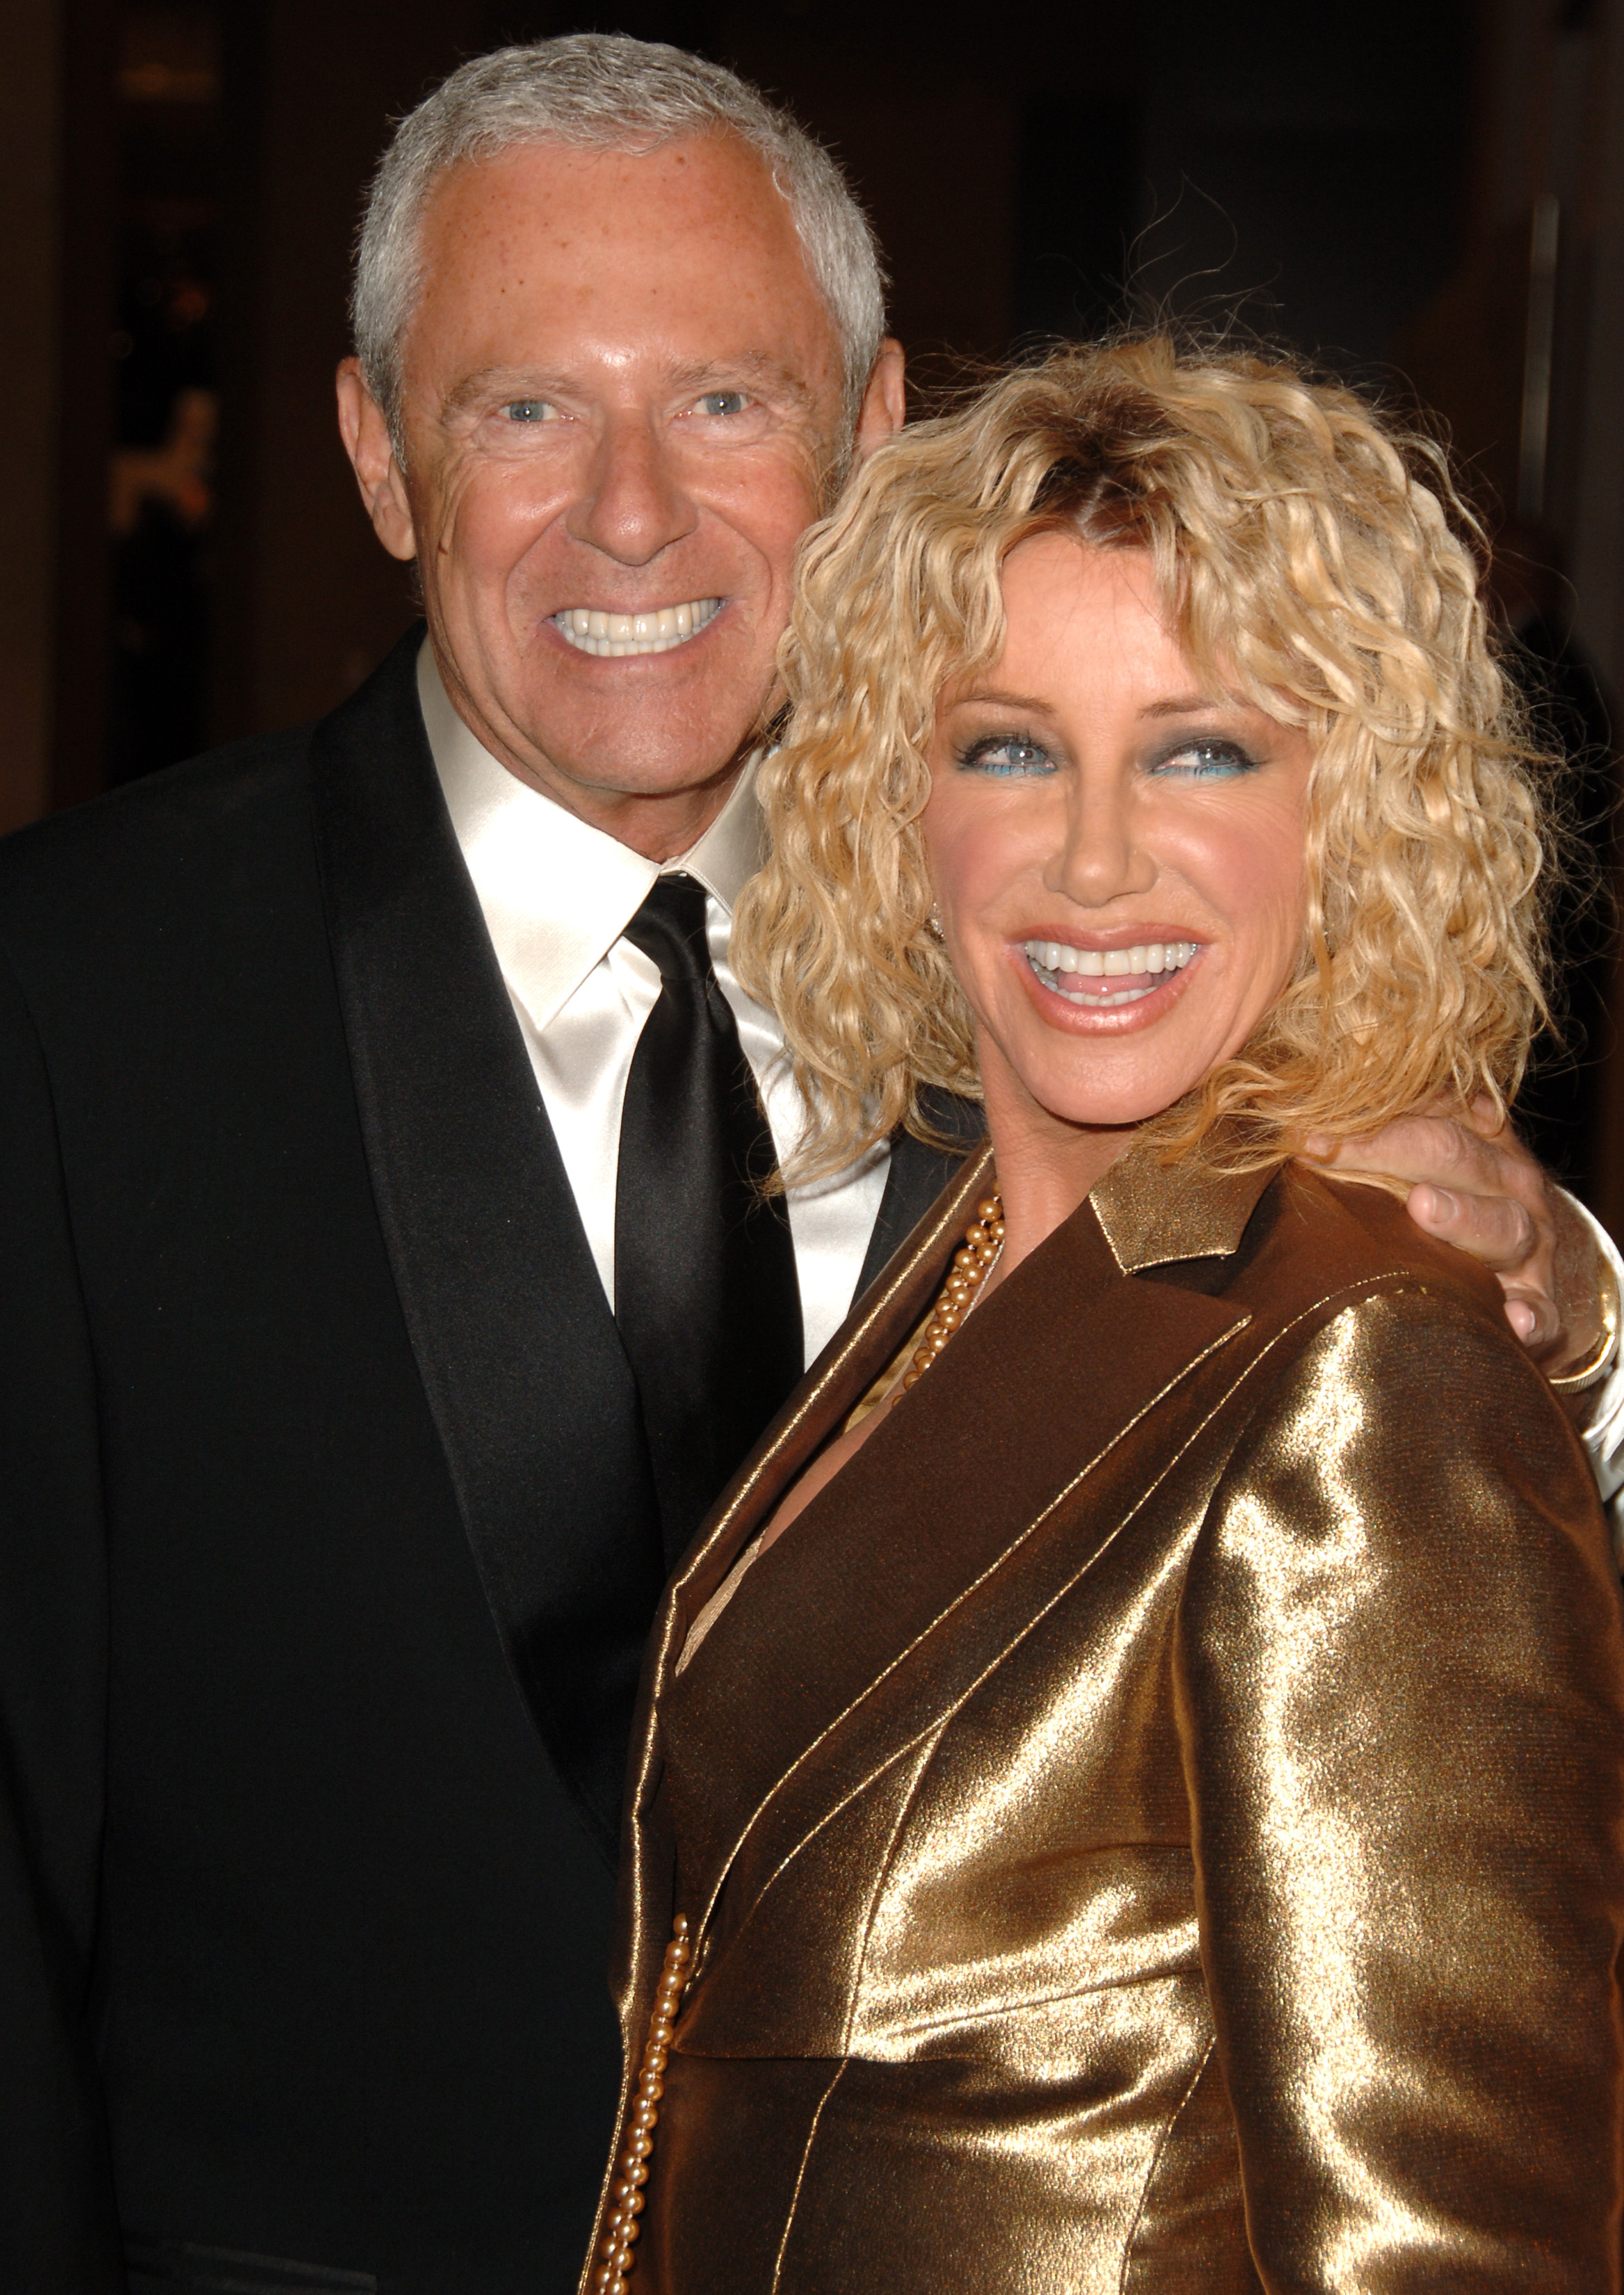 Alan Hamel y Suzanne Somers en el Mercedes-Benz Presents the 17th Carousel of Hope Ball | Foto: Getty Images